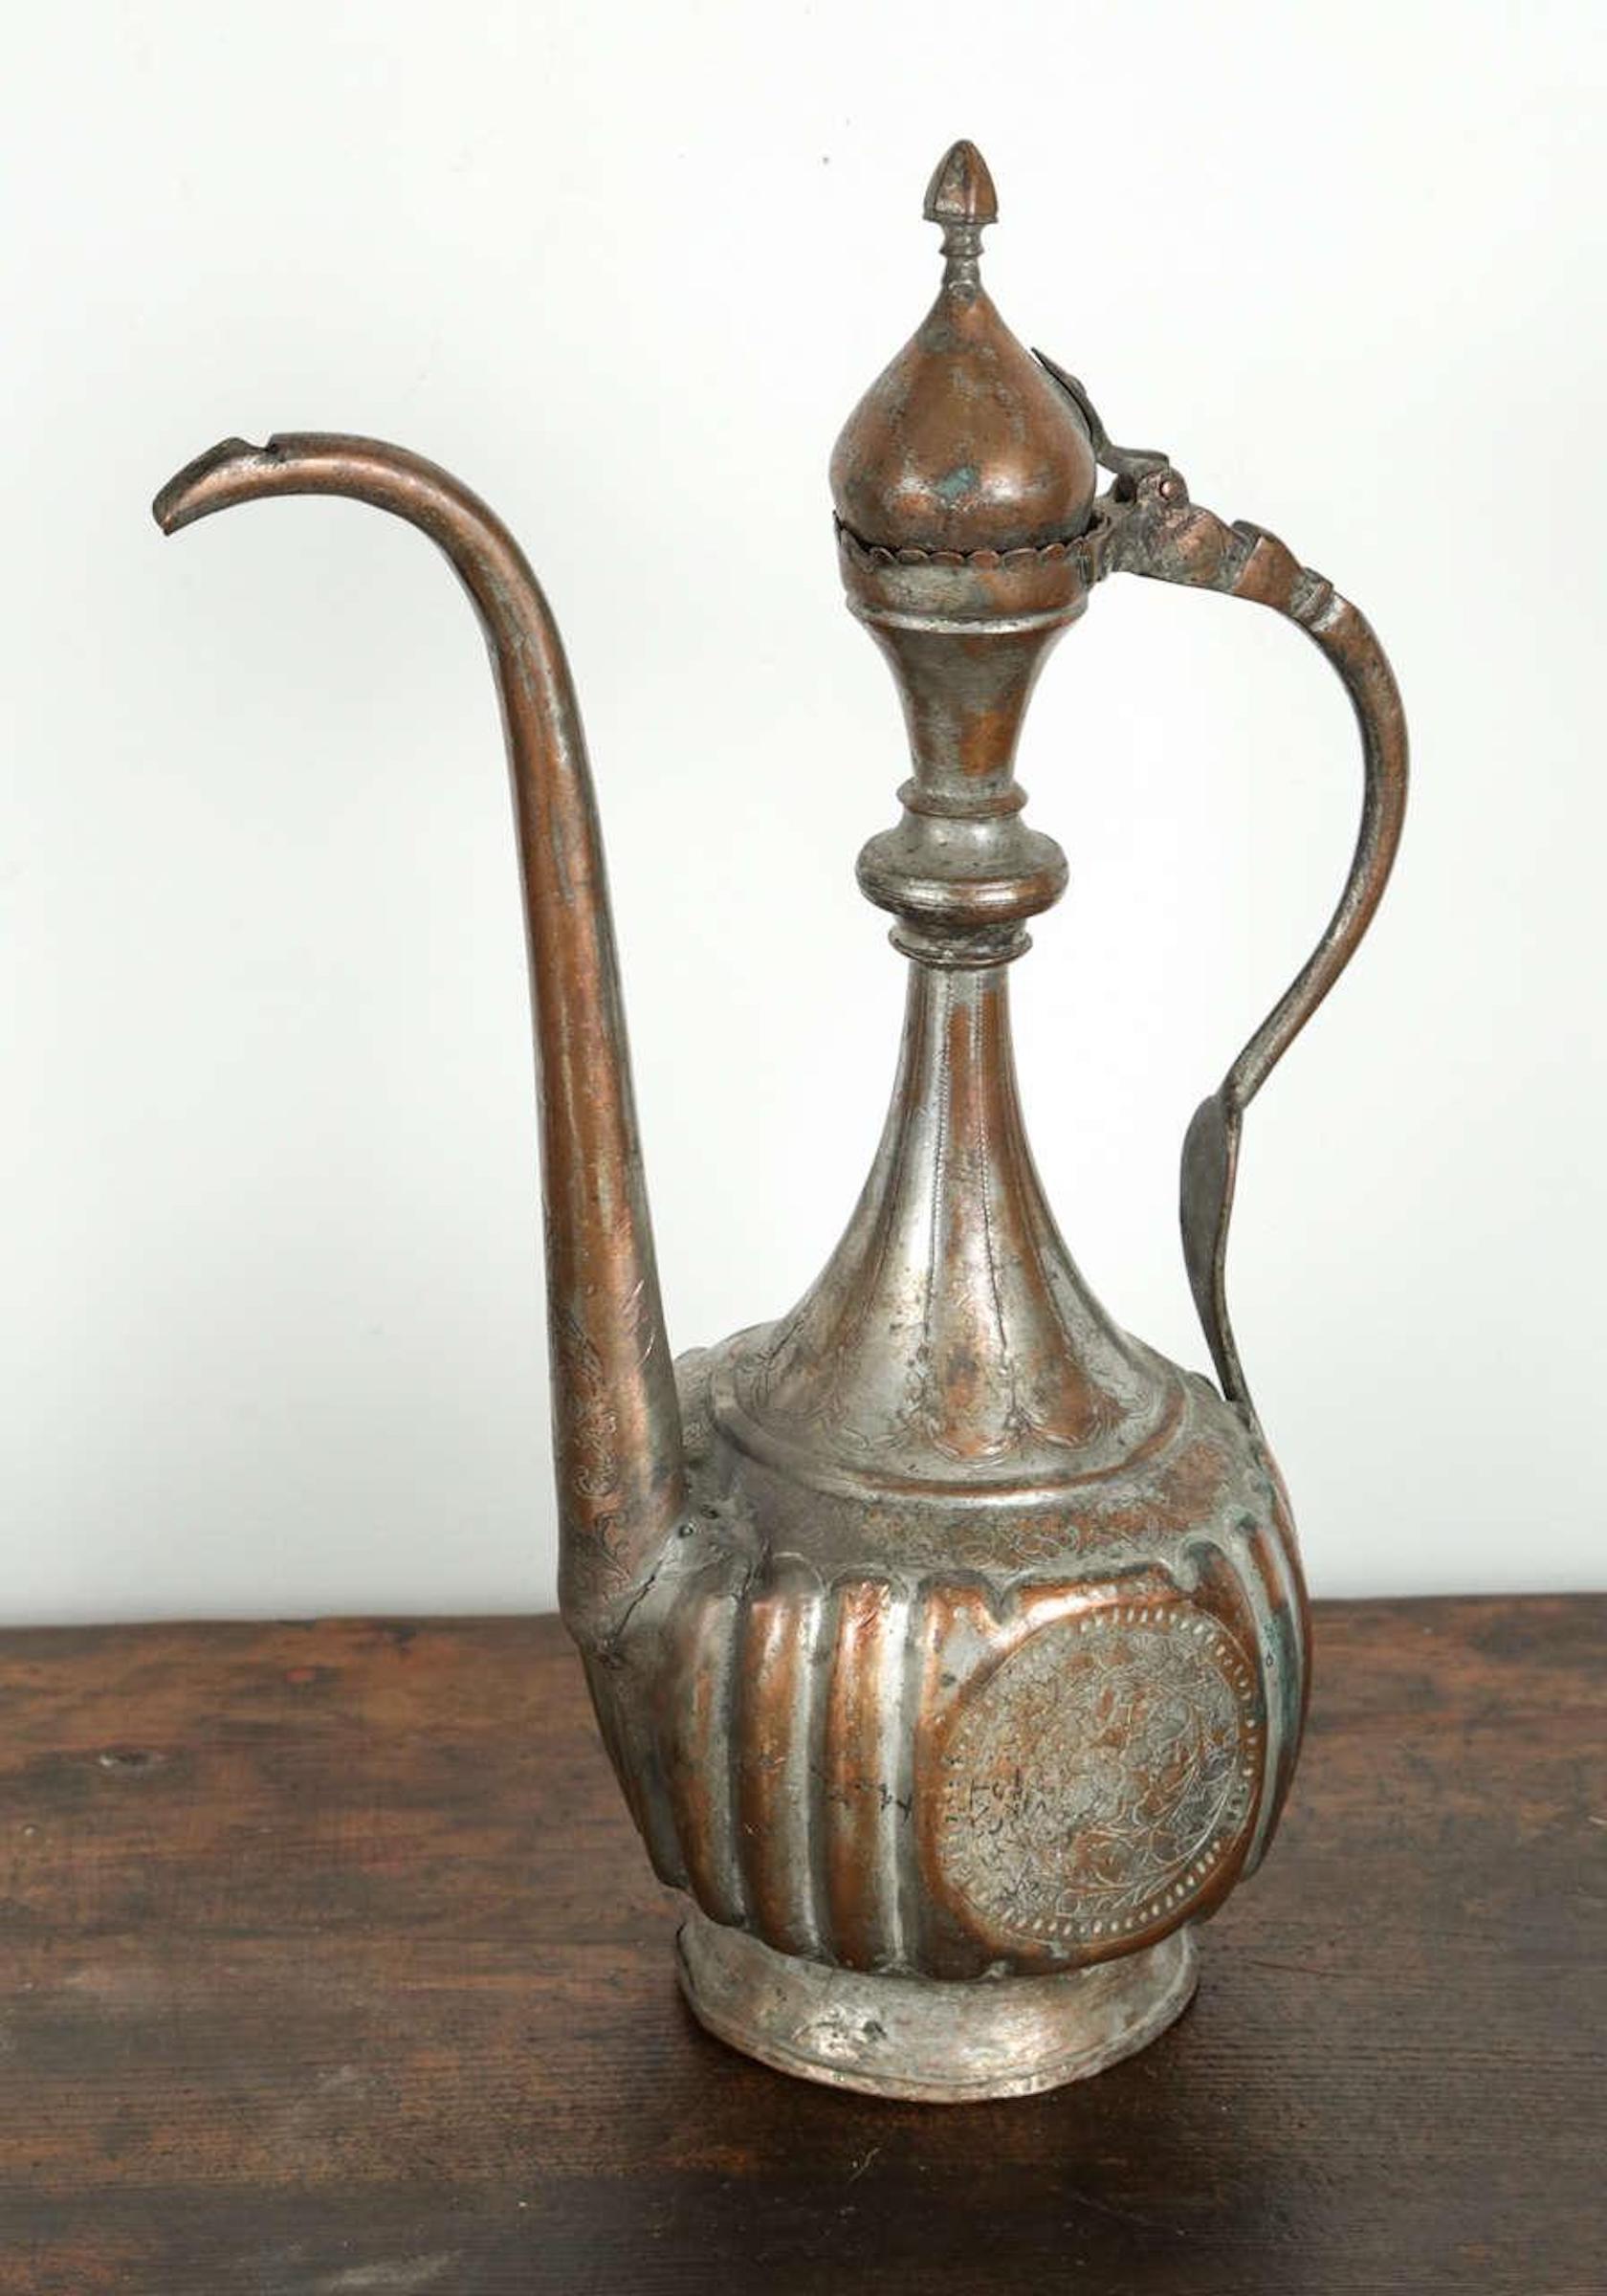 Antique 19th century Asian, Middle Eastern style Turkish tinned copper ewer.
Antique Turkish ottoman Islamic Ewer Tombak pitcher brass copper Ibrik.
Nice antique decorative hand-crafted and hammered Moorish ewer in the Mameluke style.
Antique